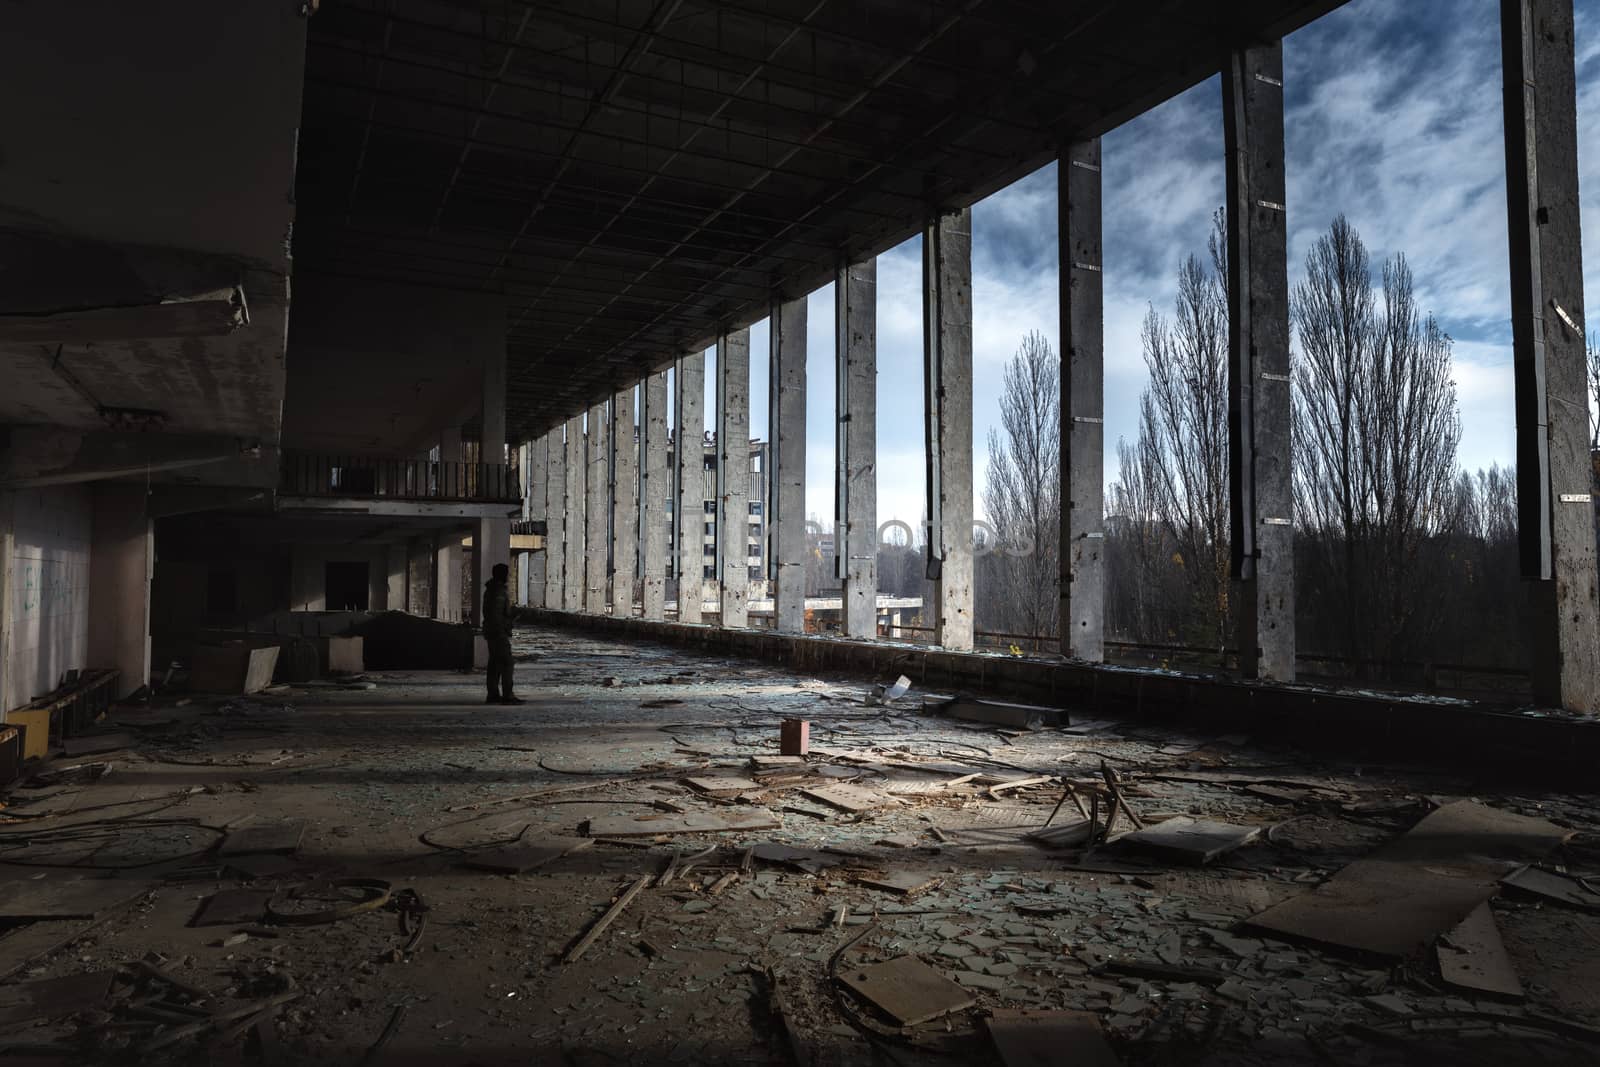 Large hall in Pripyat city center angle shot, Chernobyl Exclusion Zone 2019